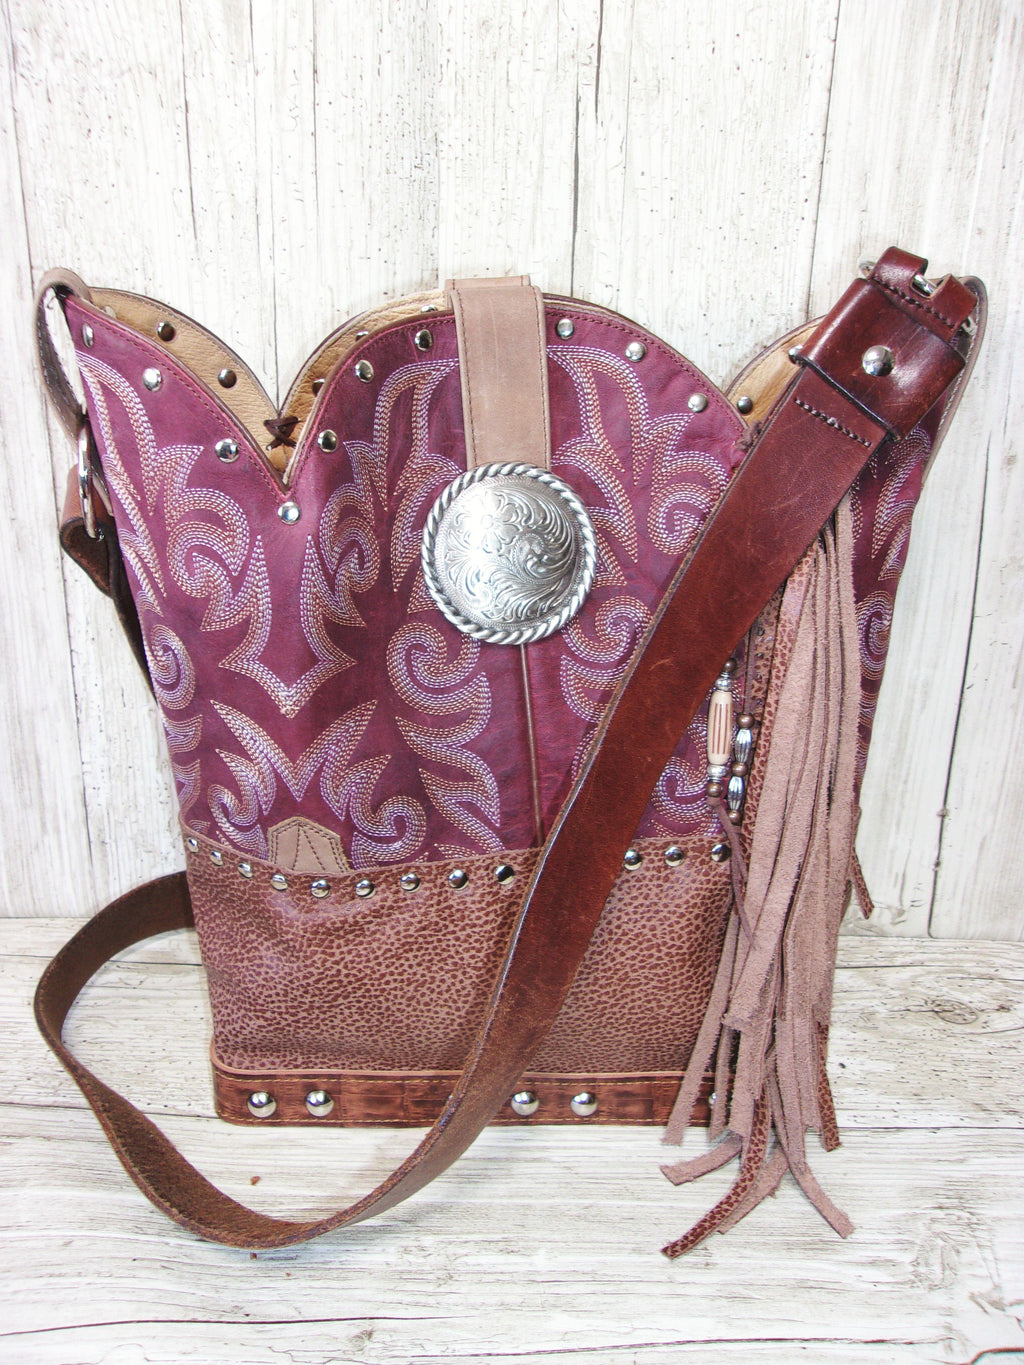 Leather Purse with Fringe - Cowboy Boot Purse with Fringe - Western Shoulder Bag with Fringe TS287 cowboy boot purses, western fringe purse, handmade leather purses, boot purse, handmade western purse, custom leather handbags Chris Thompson Bags